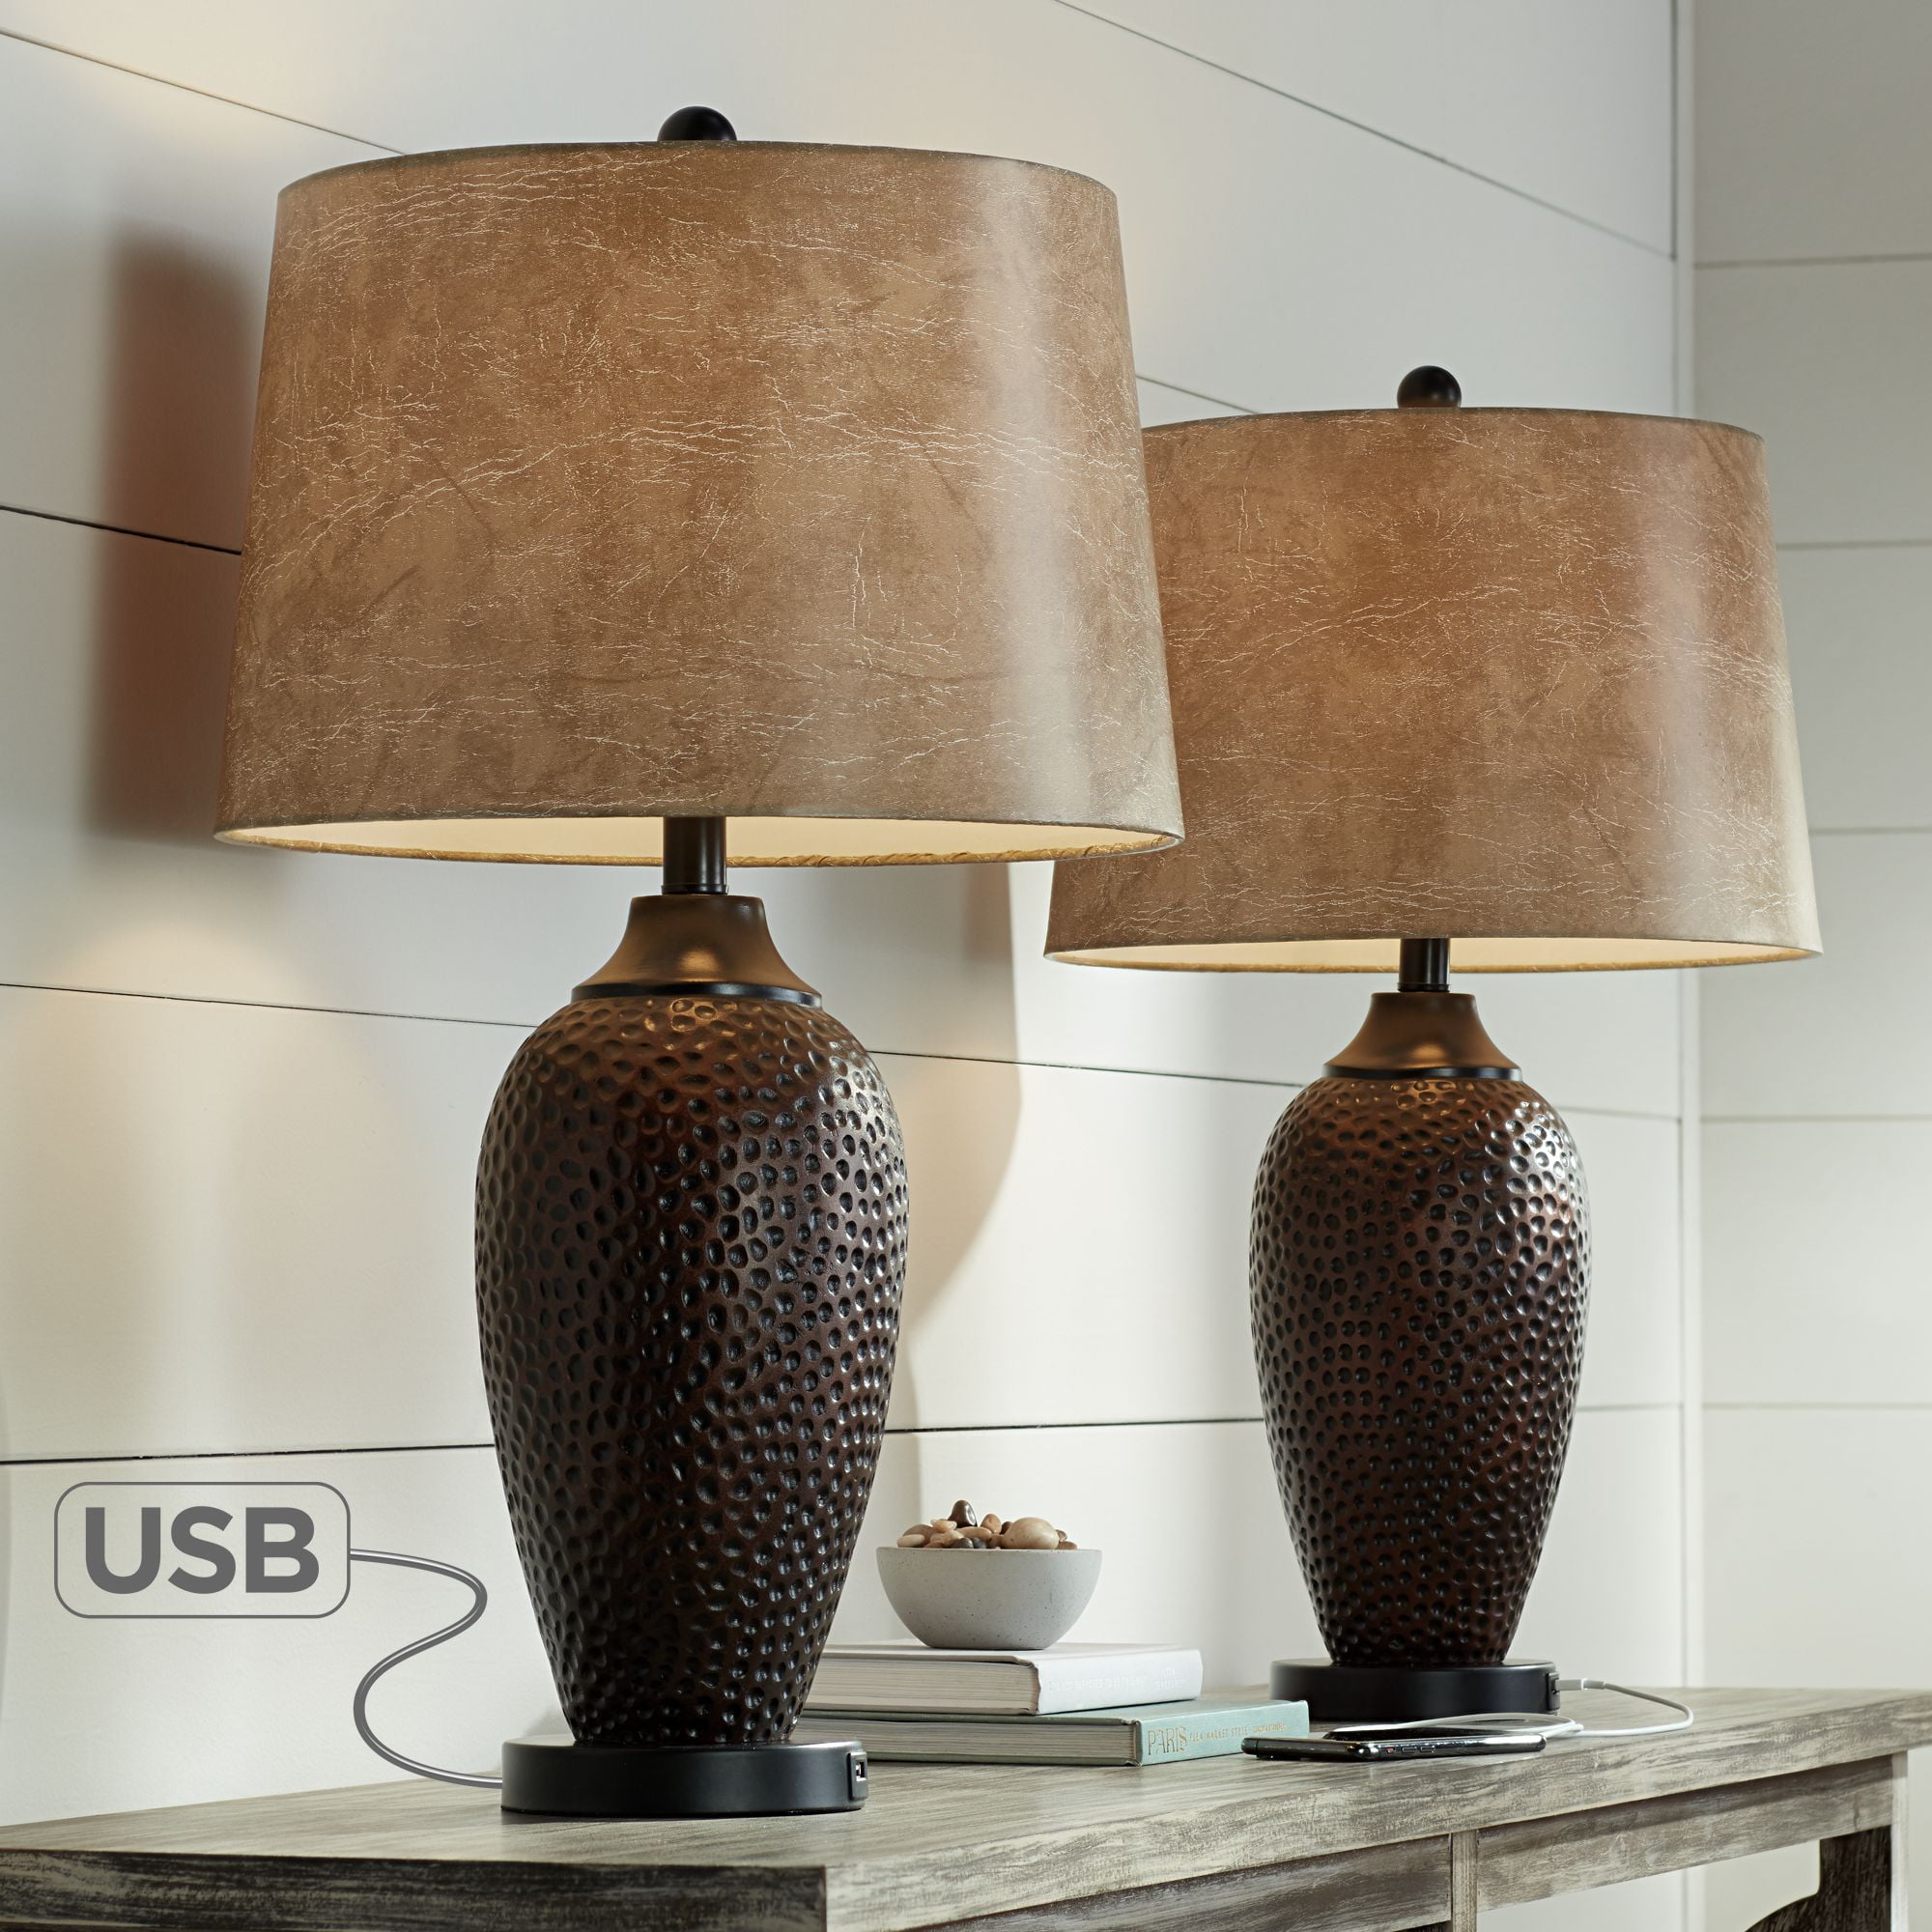 Rustic Industrial Table Lamp, Hammered Bronze Table Lamps